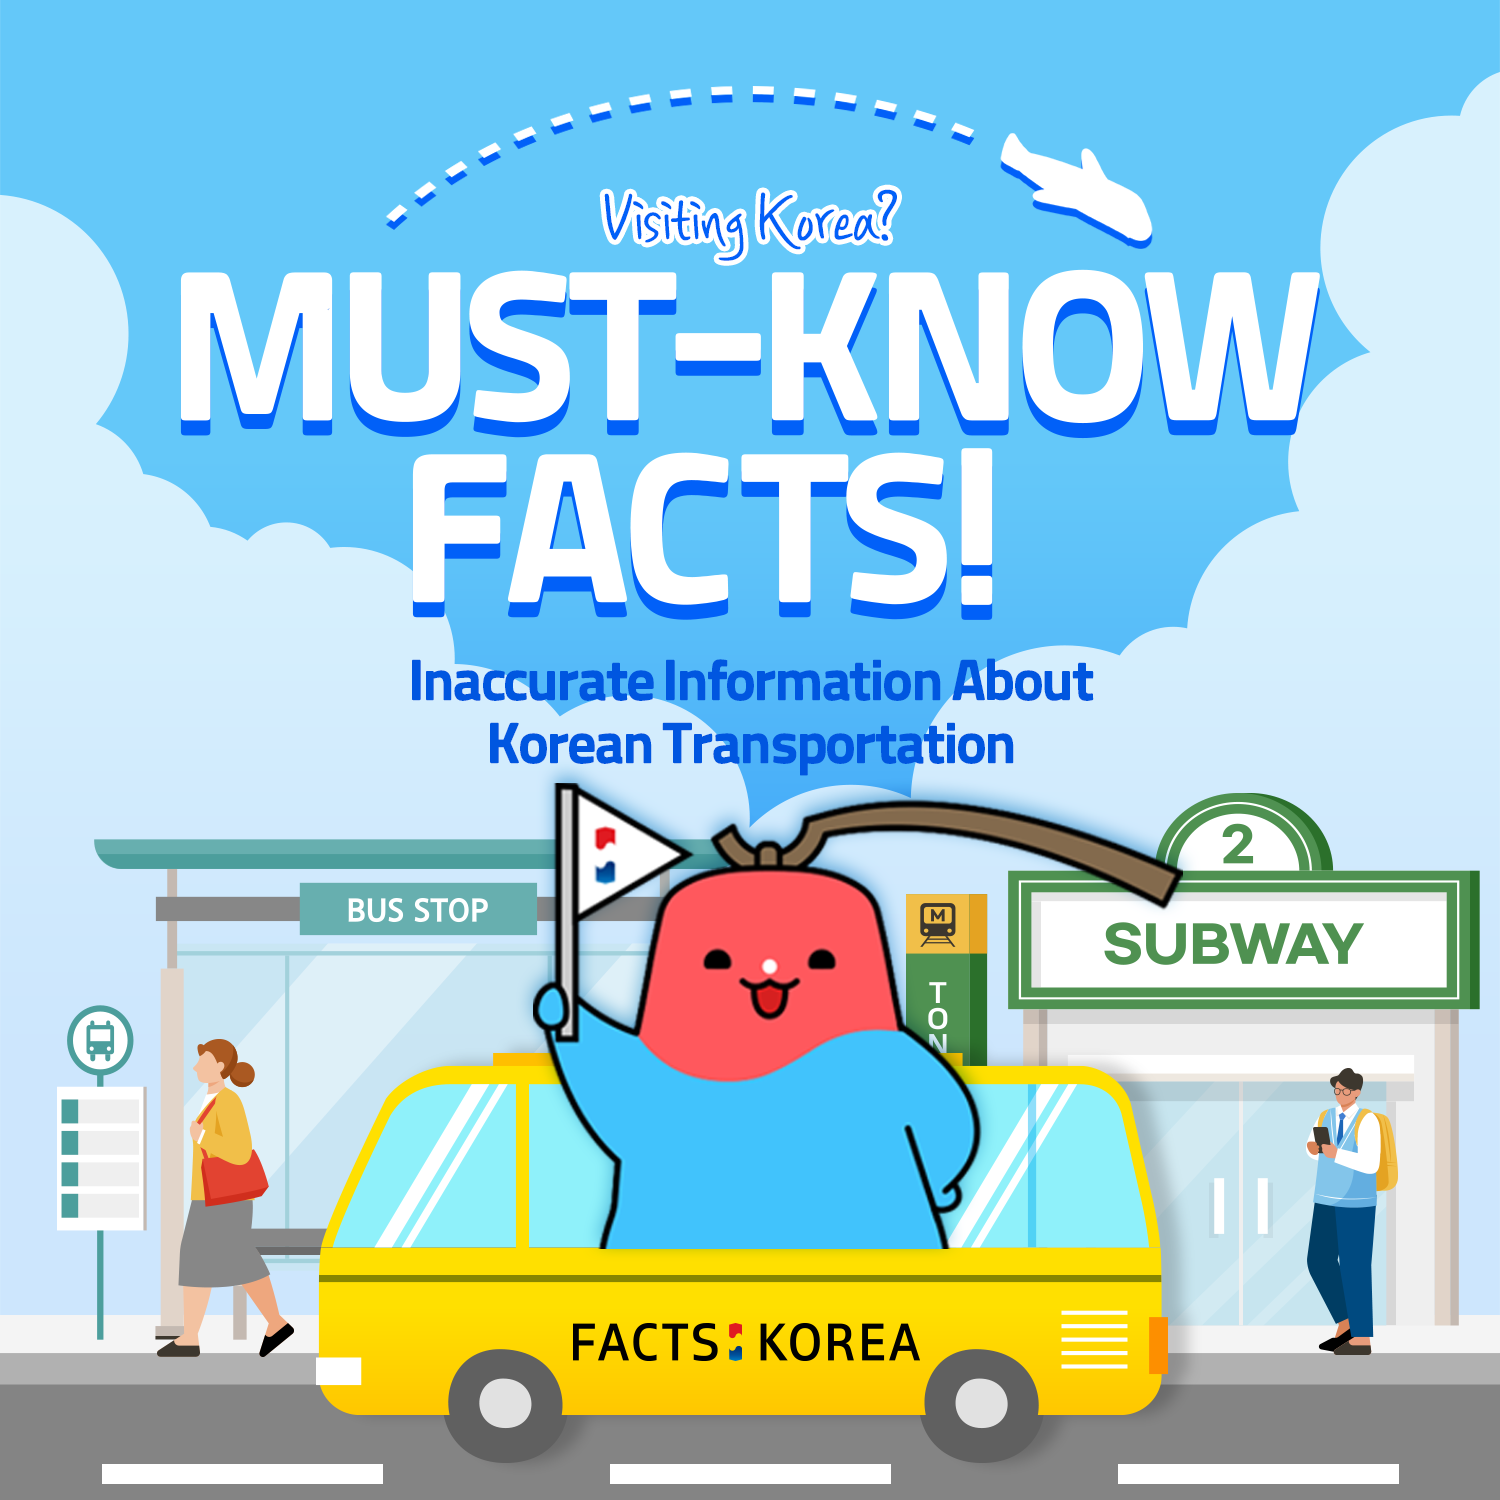 Inaccurate Information About Korean Transportation